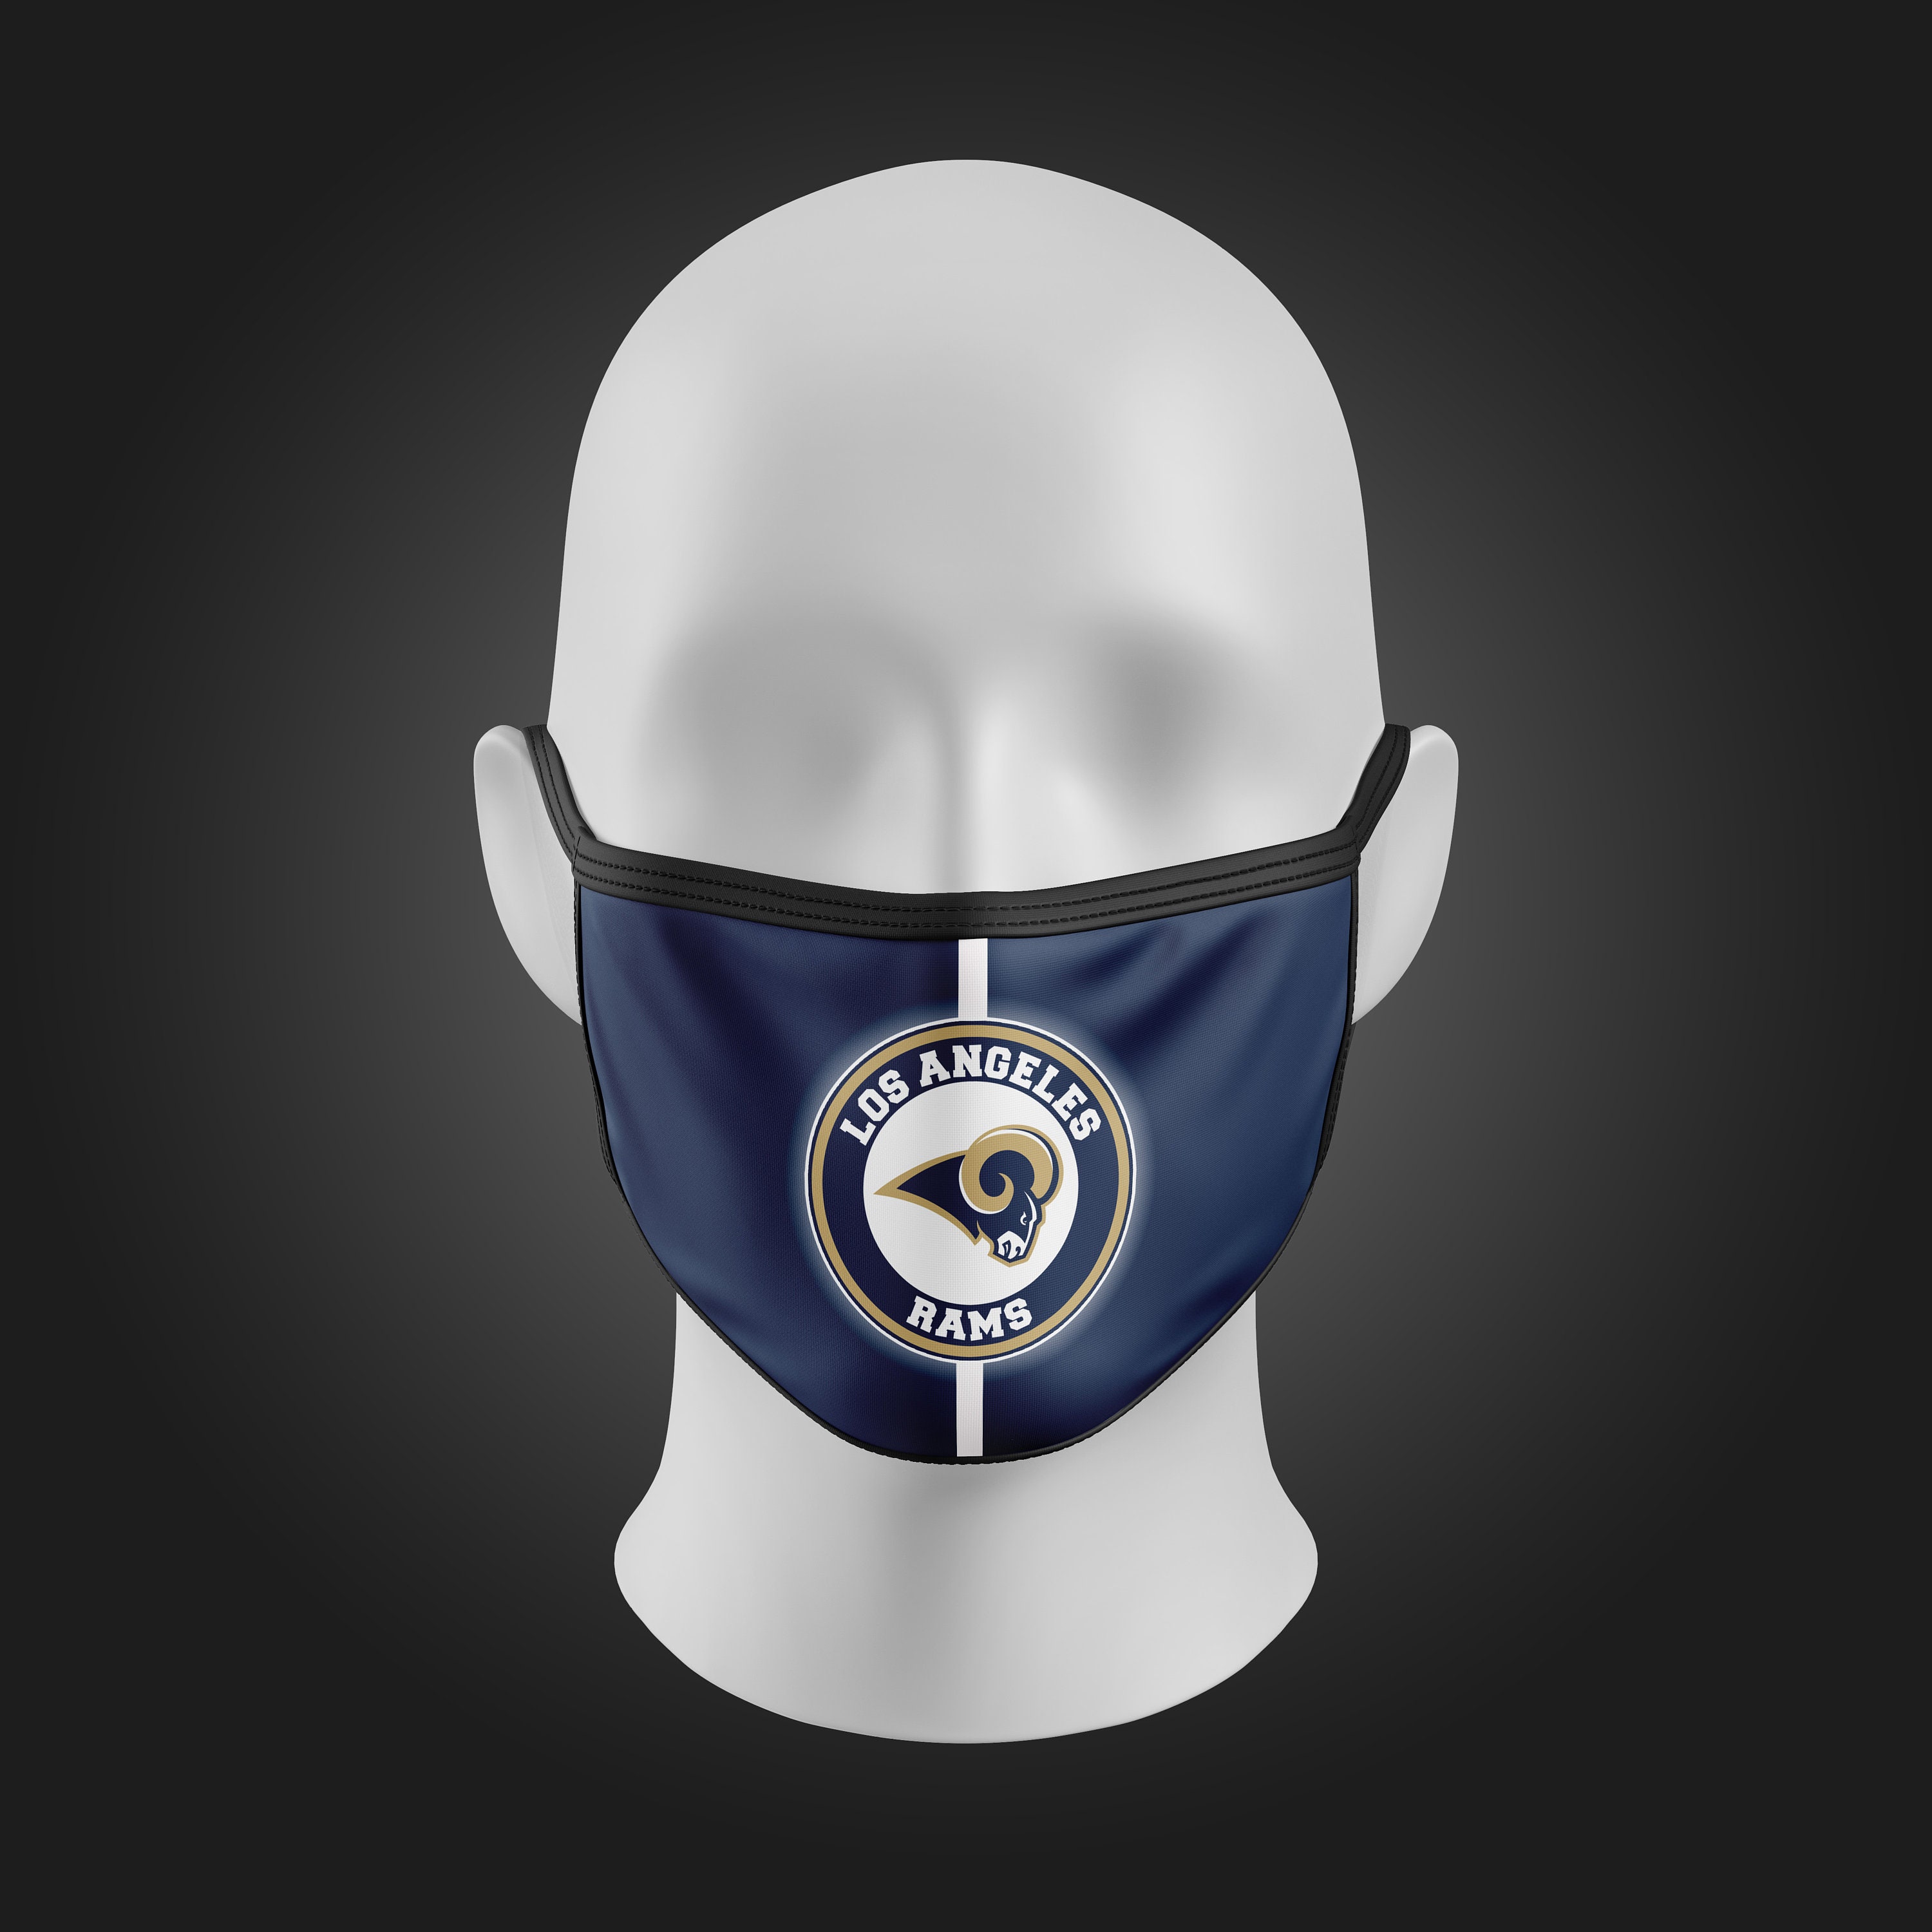 Los Angeles Rams Face Mask Design With Filter Pocket